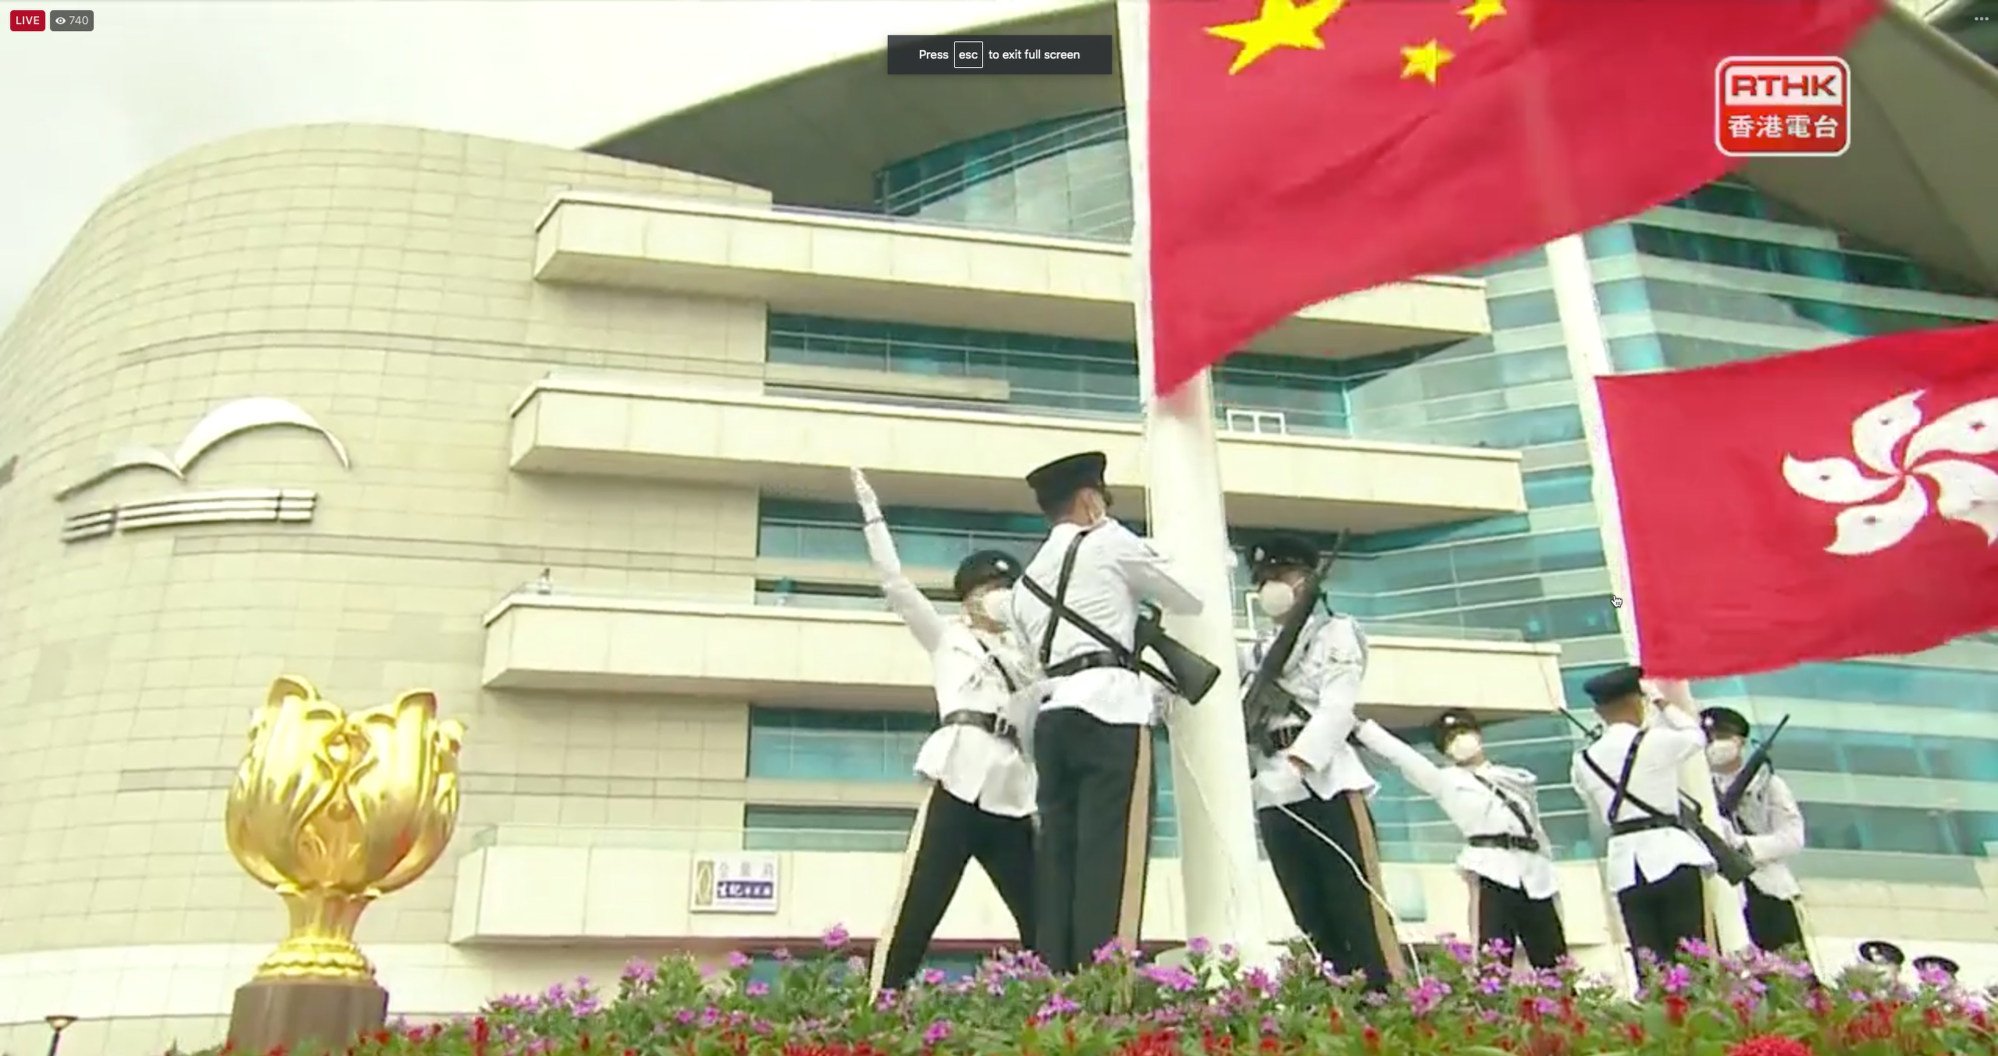 Officers raise the national and city flags with a No 3 typhoon warning signal in force. Photo: RTHK